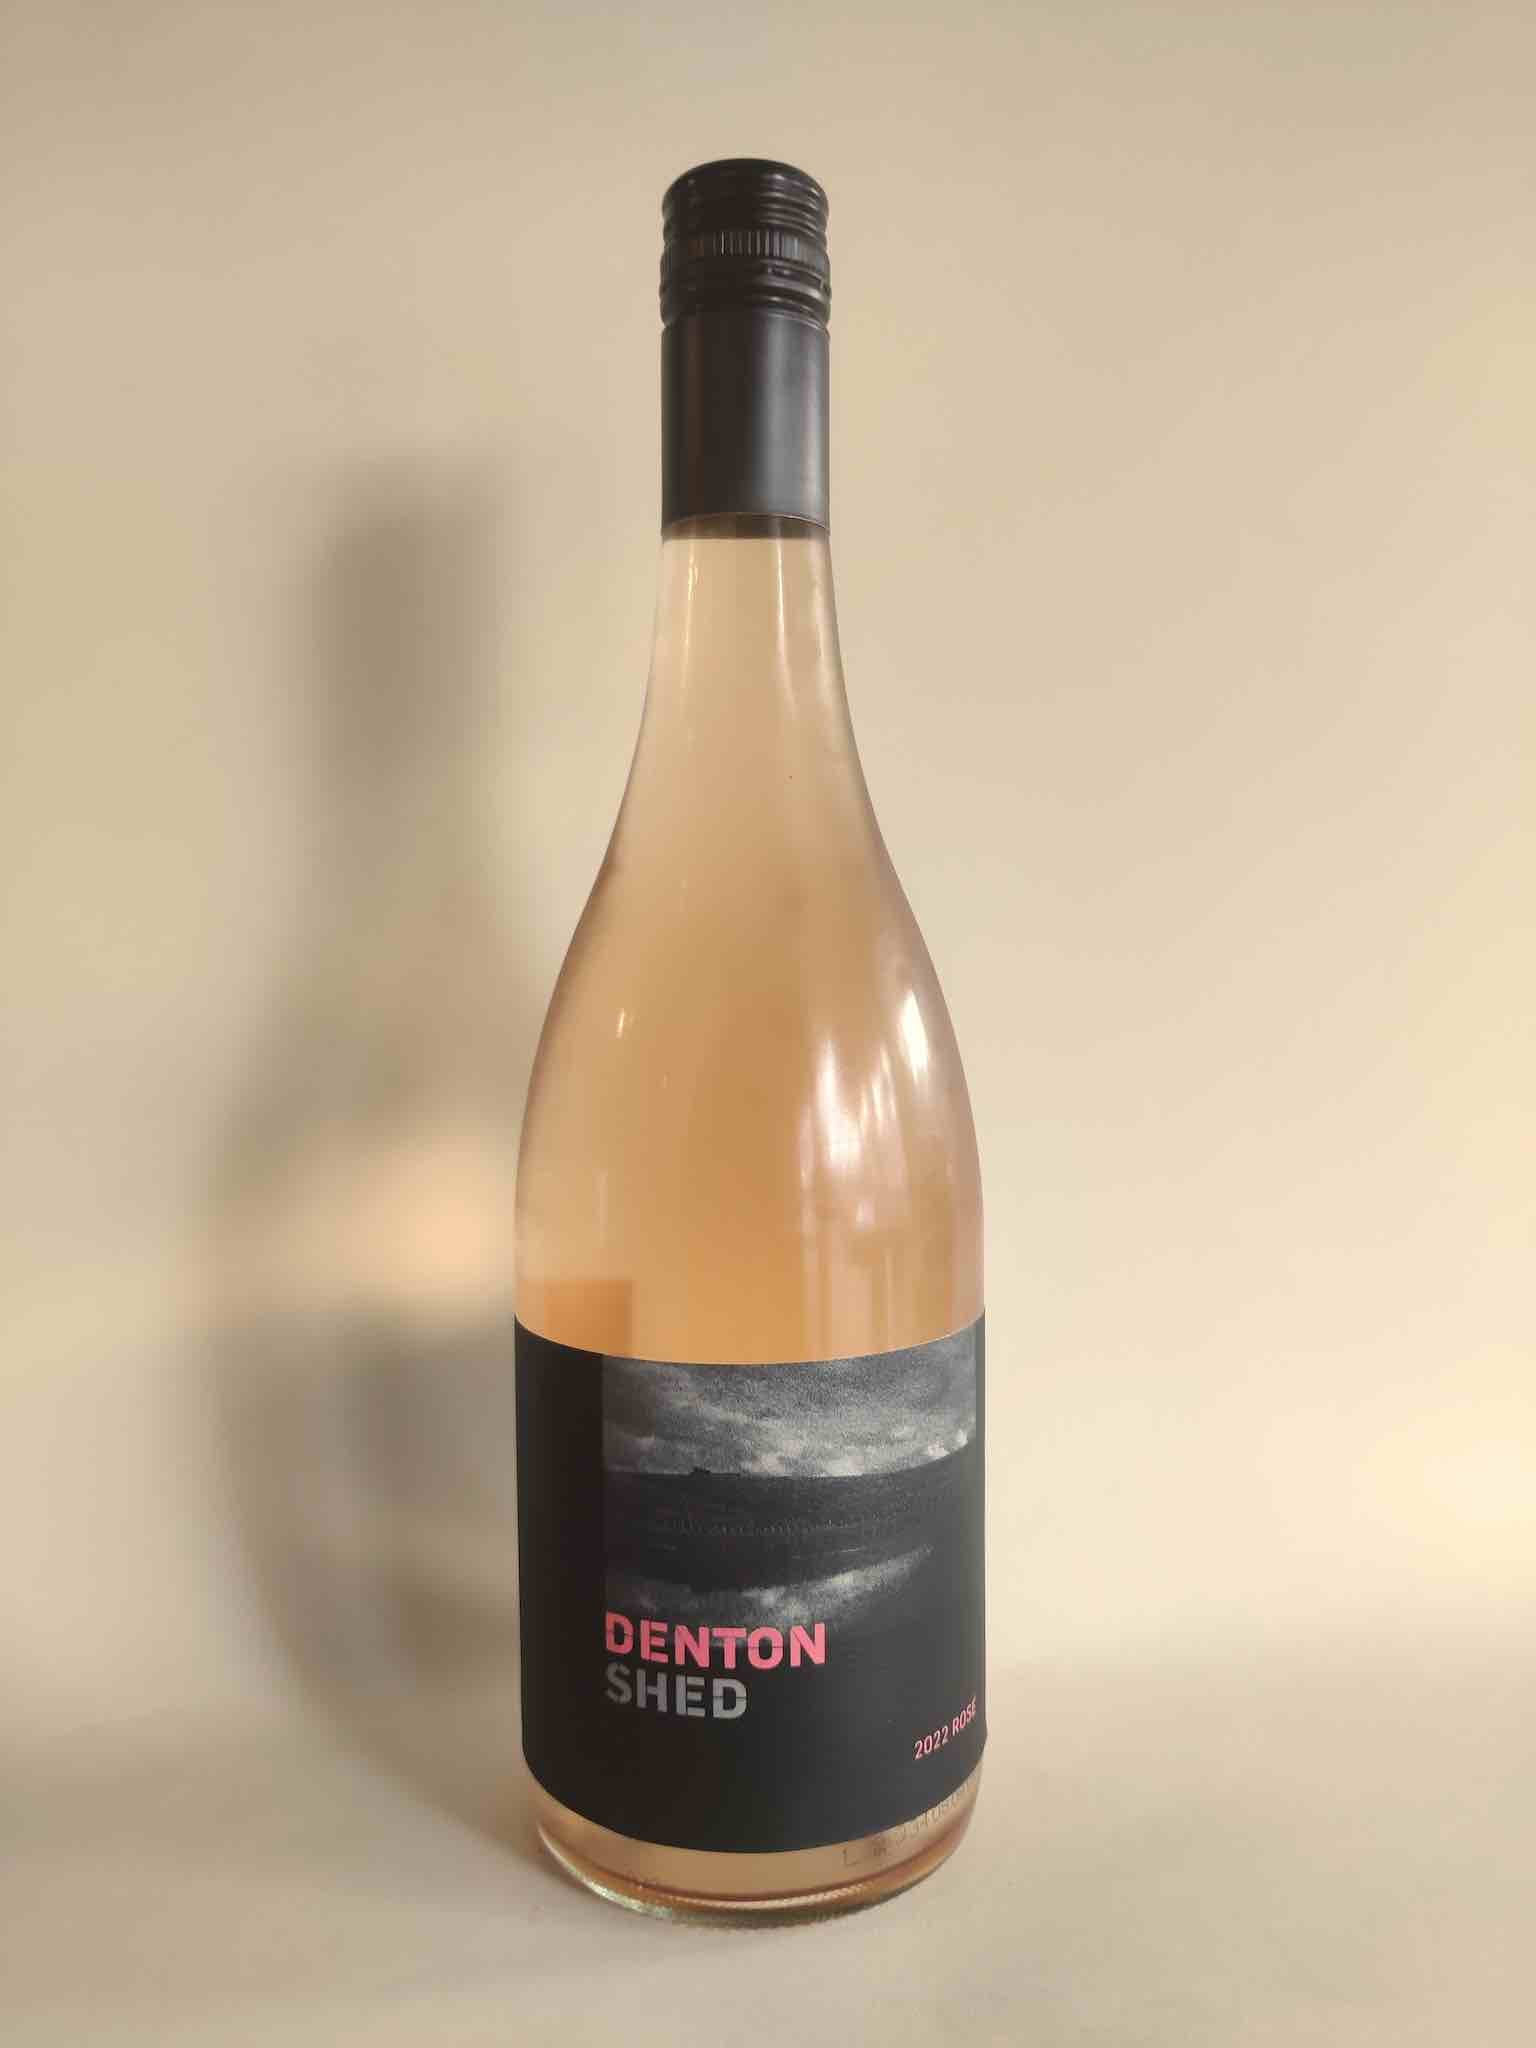 A bottle of Denton Shed Rosé from the Yarra Valley, Victoria.